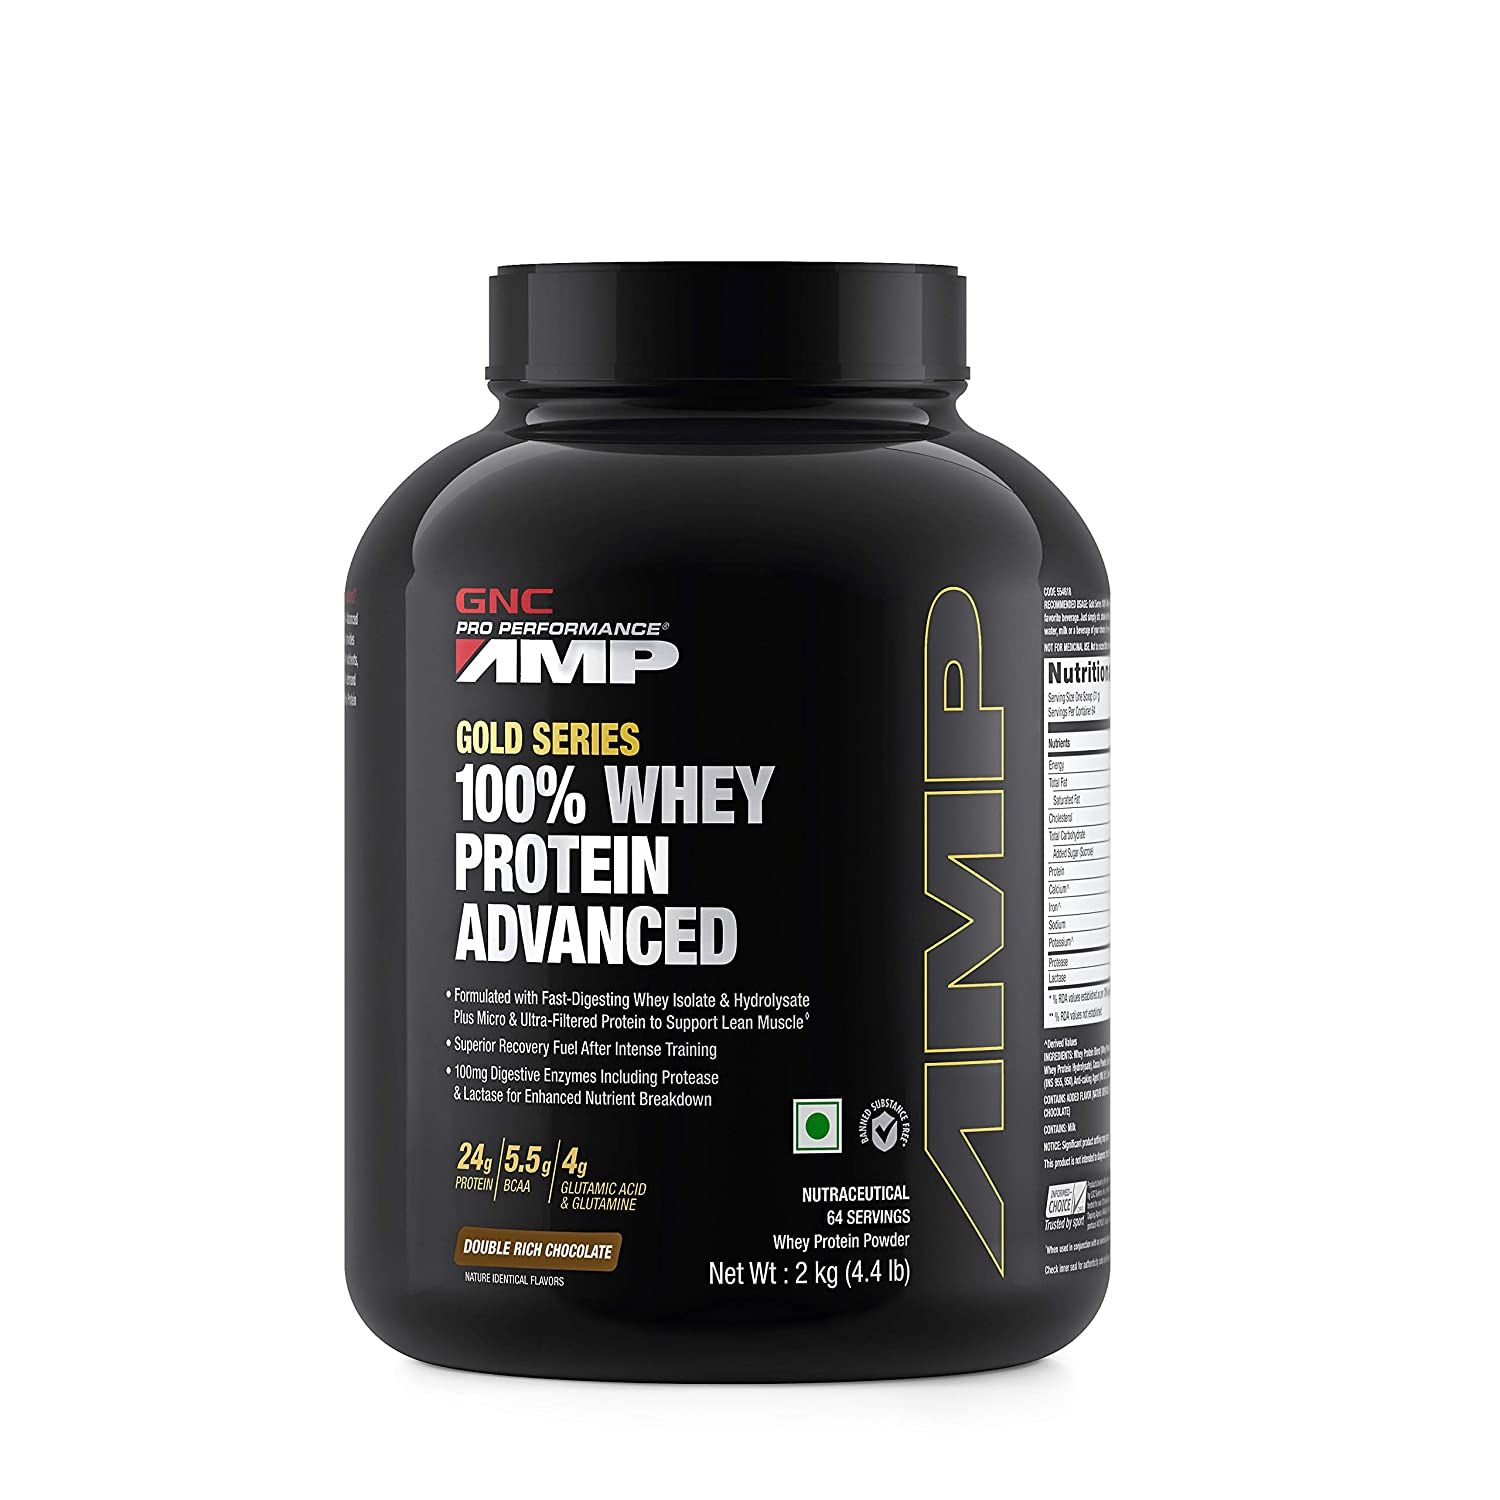 GNC Amp Gold Series 100% Whey Protein Advanced Image